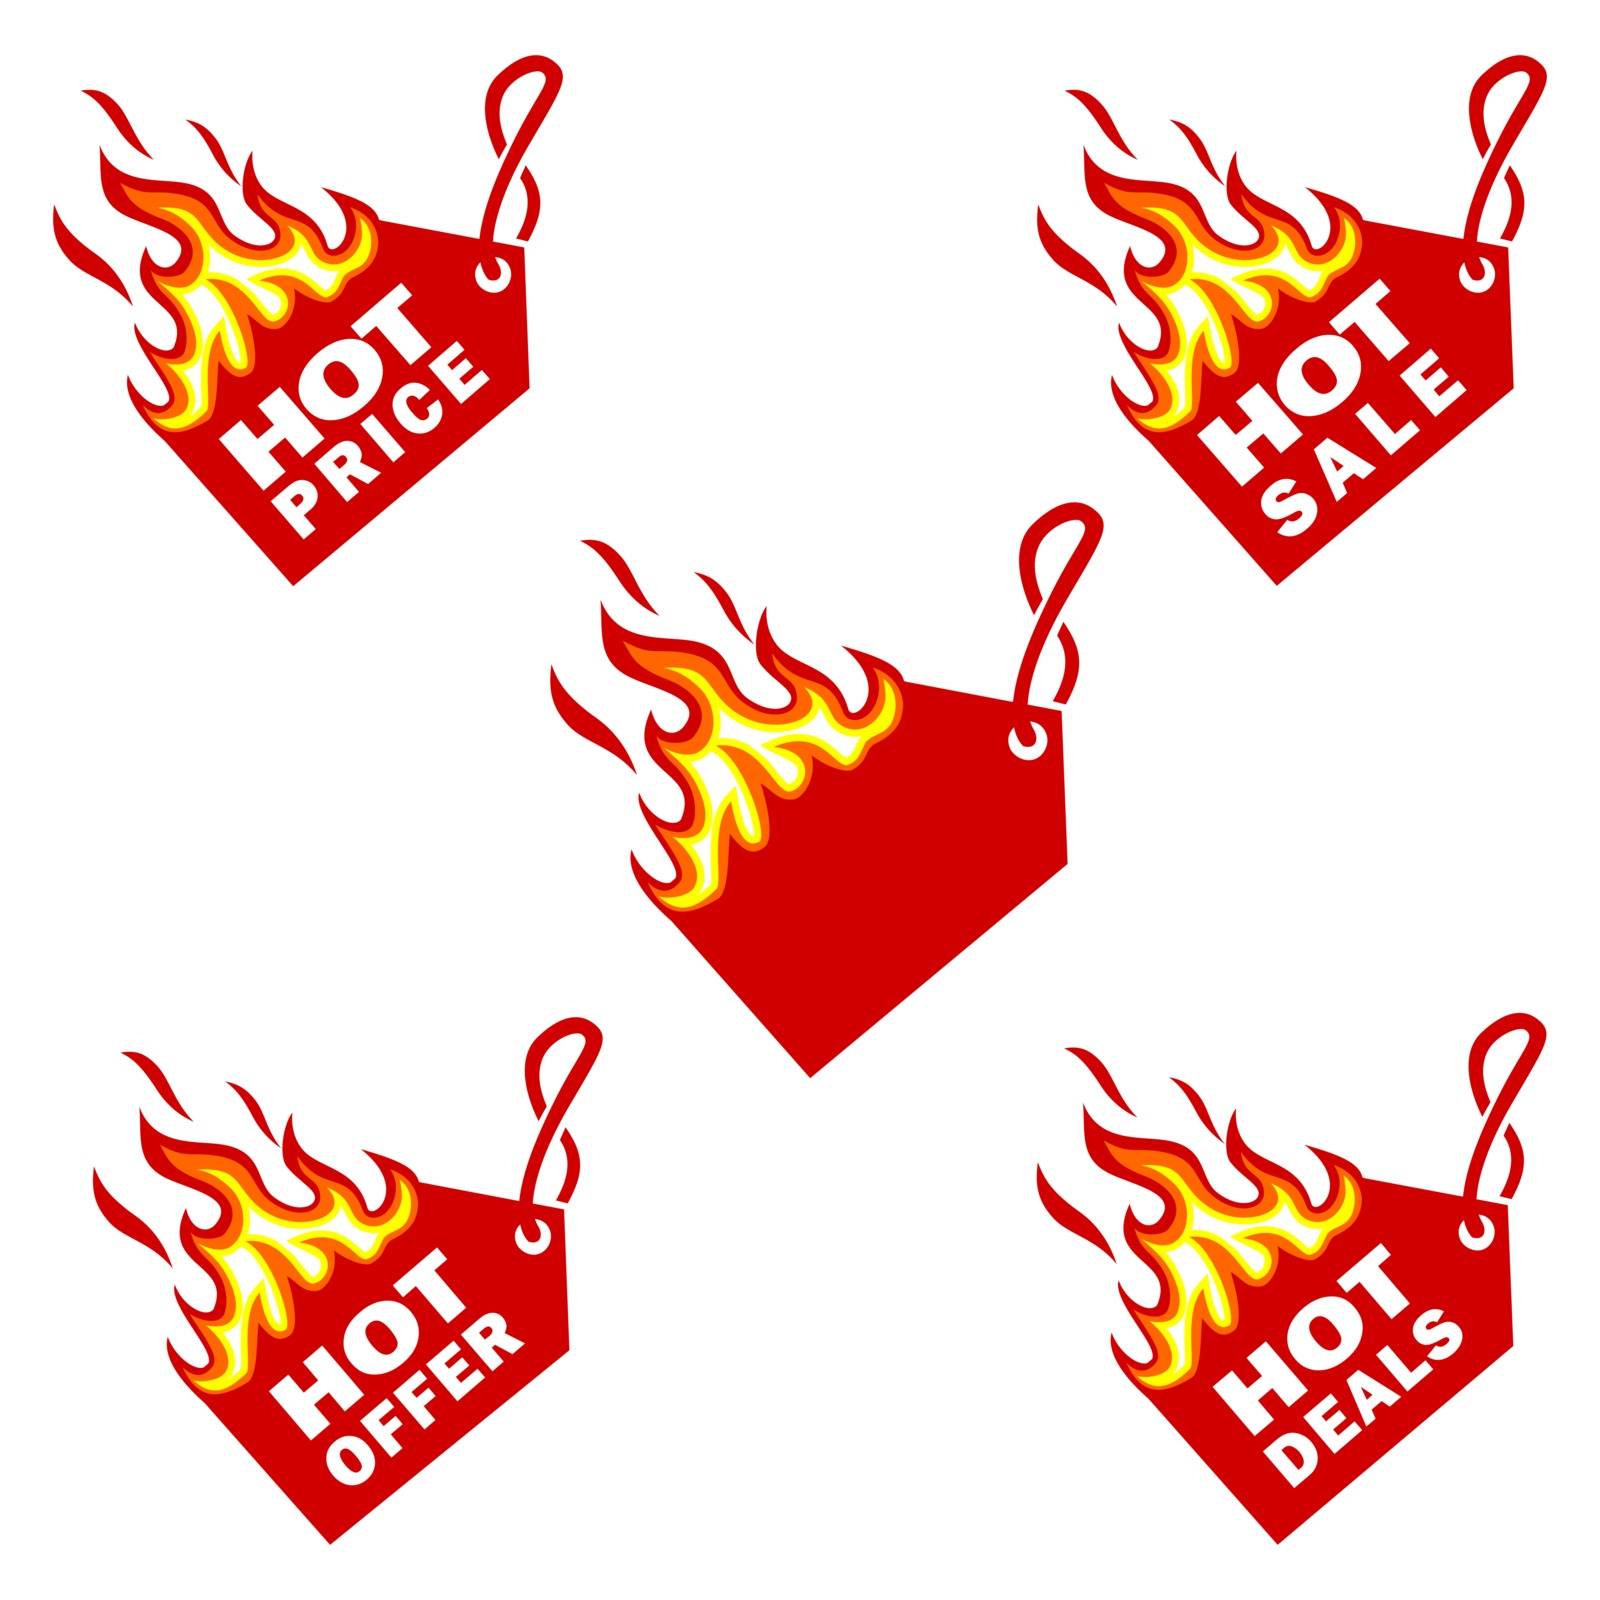 Hot Price and Hot Deal labels, Flame Tags sale promotion design template